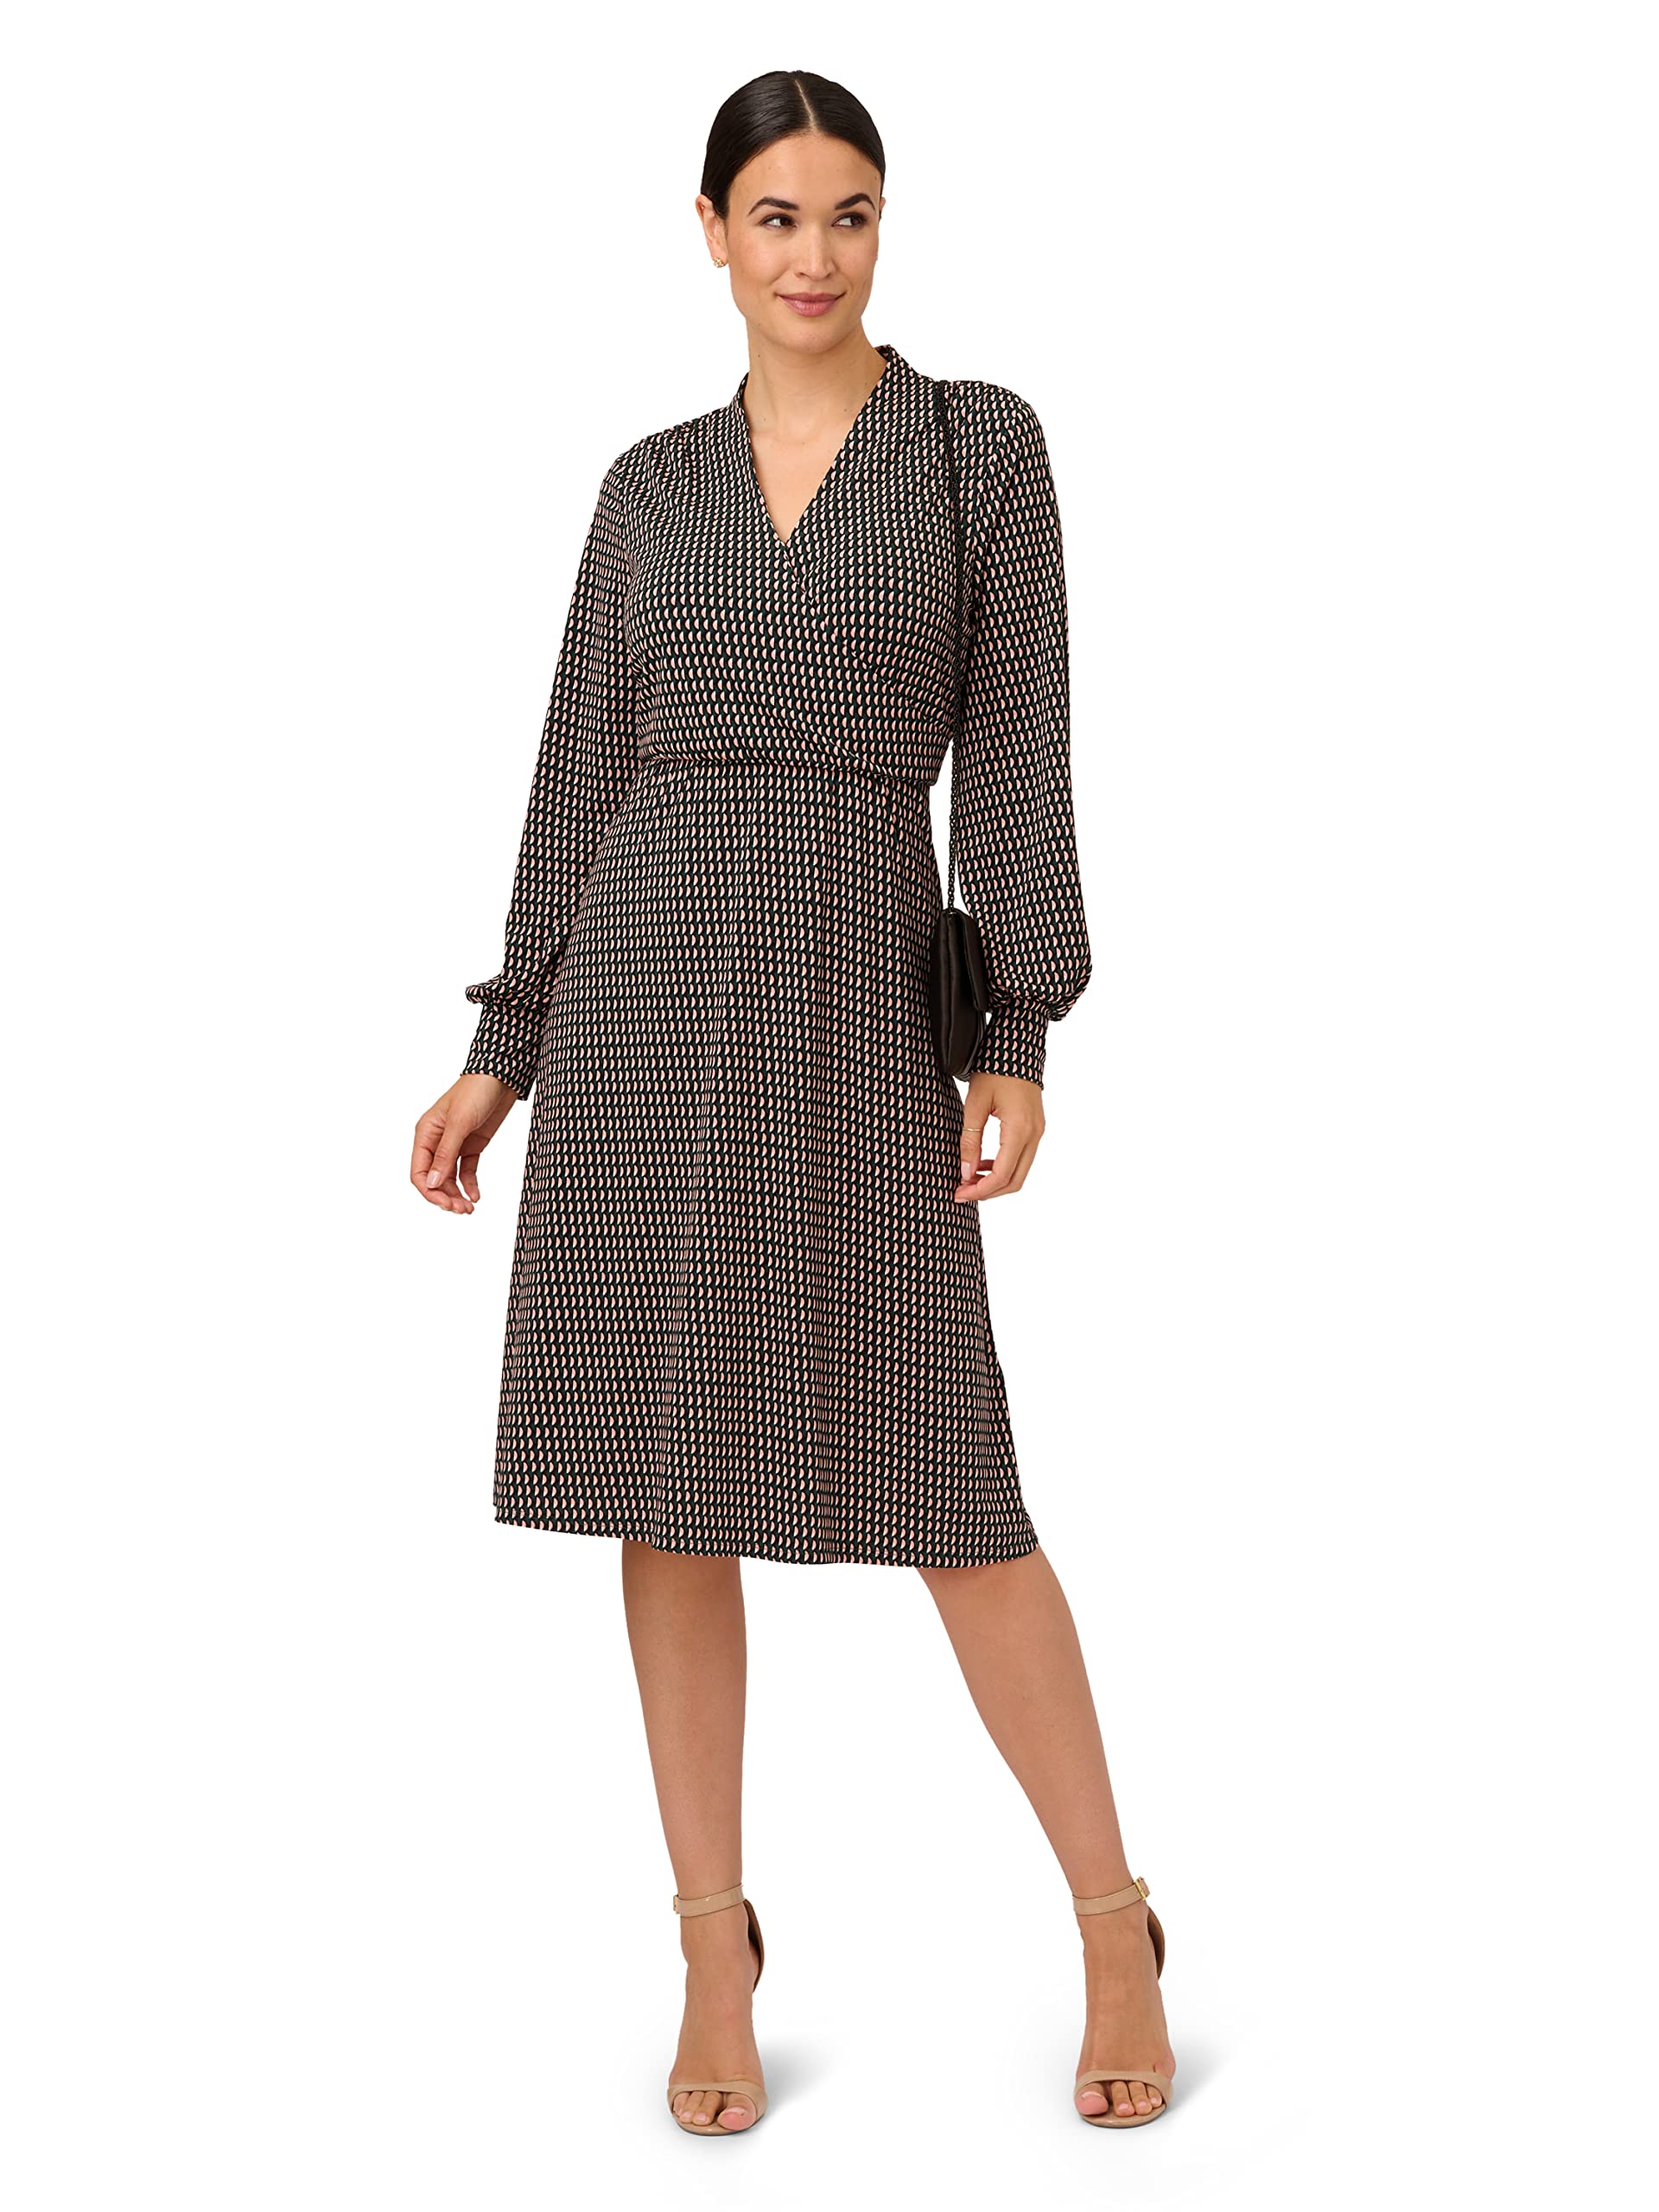 Adrianna Papell Women's Printed Faux Wrap Dress with Long Bishop Sleeves